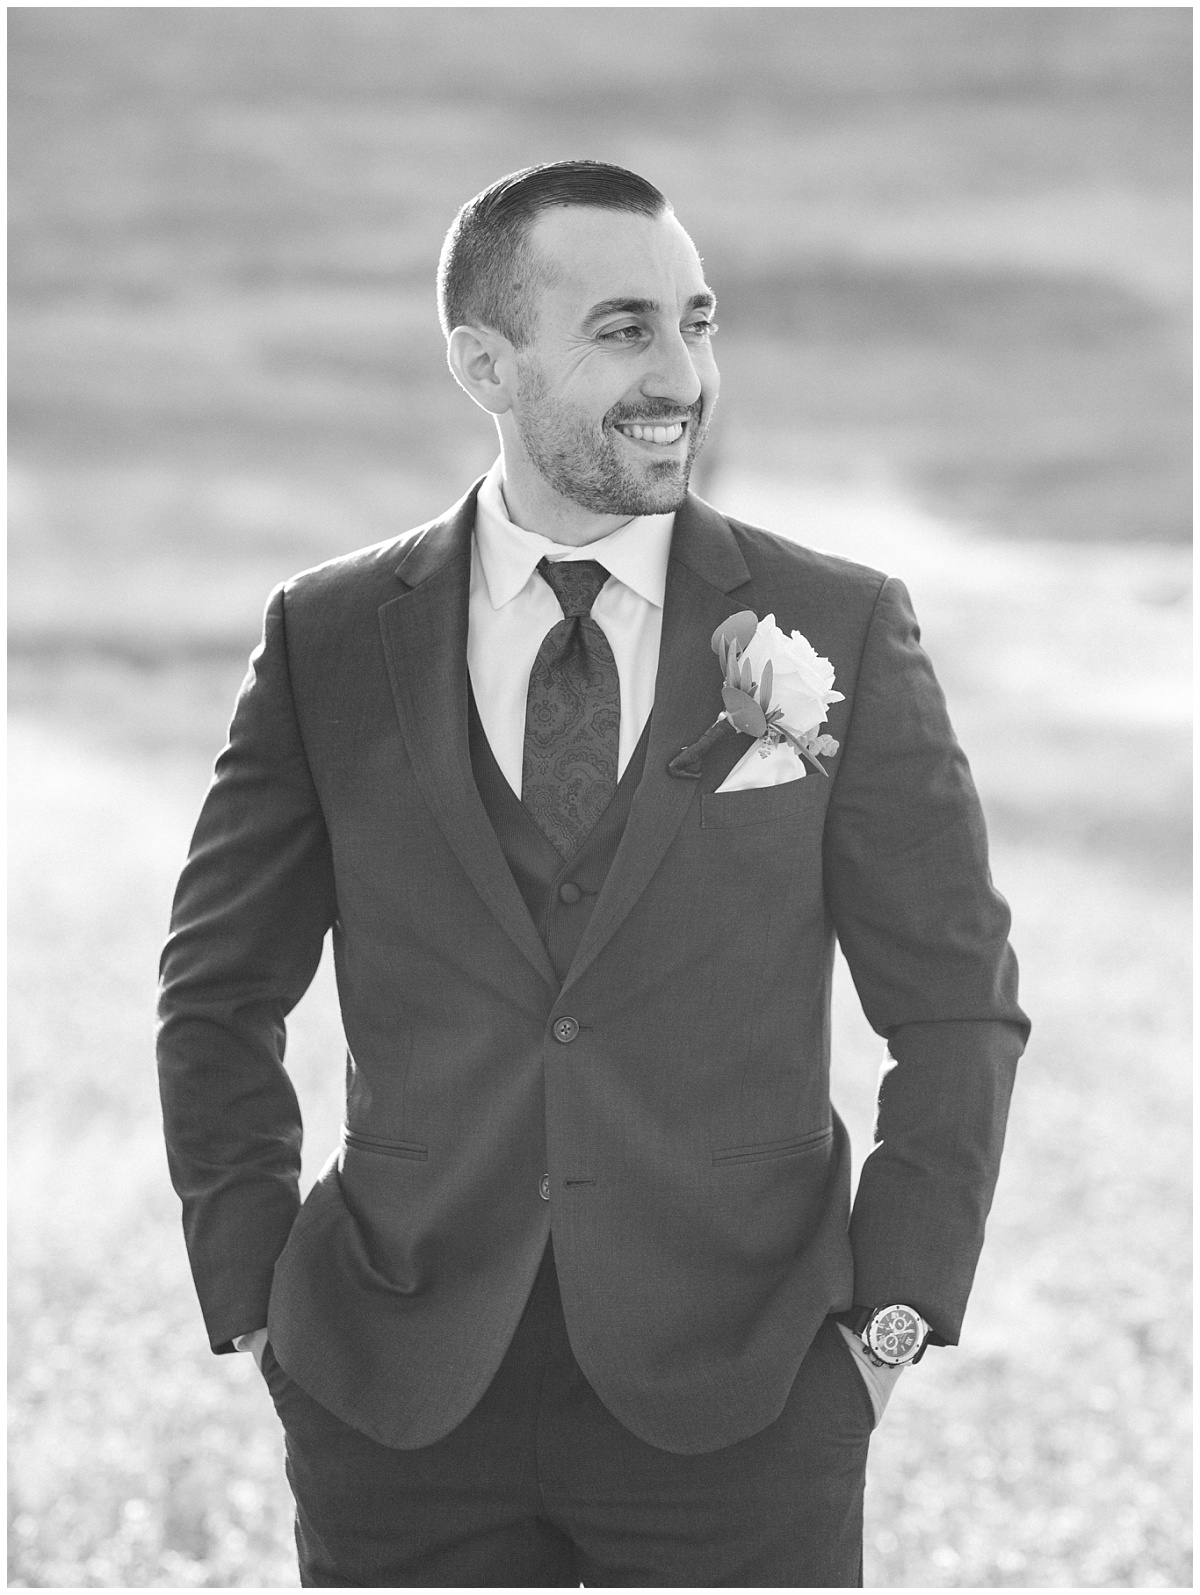 Groom Details in Black and White